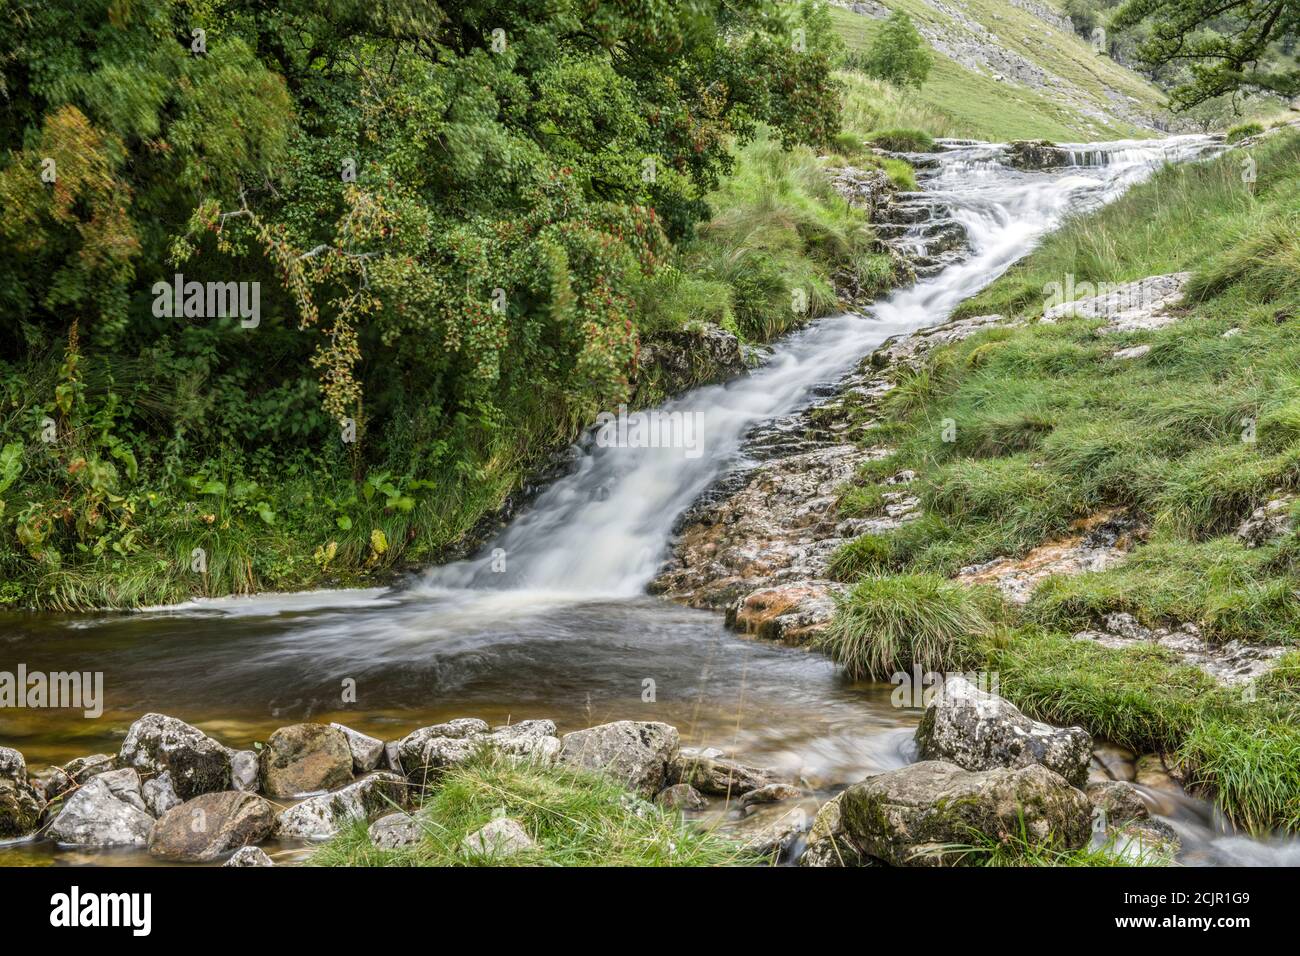 Bach kommt hinunter Buckden Ghyll hinter Buckden Village in Upper Wharfedale im Yorkshire Dales National Park. Stockfoto